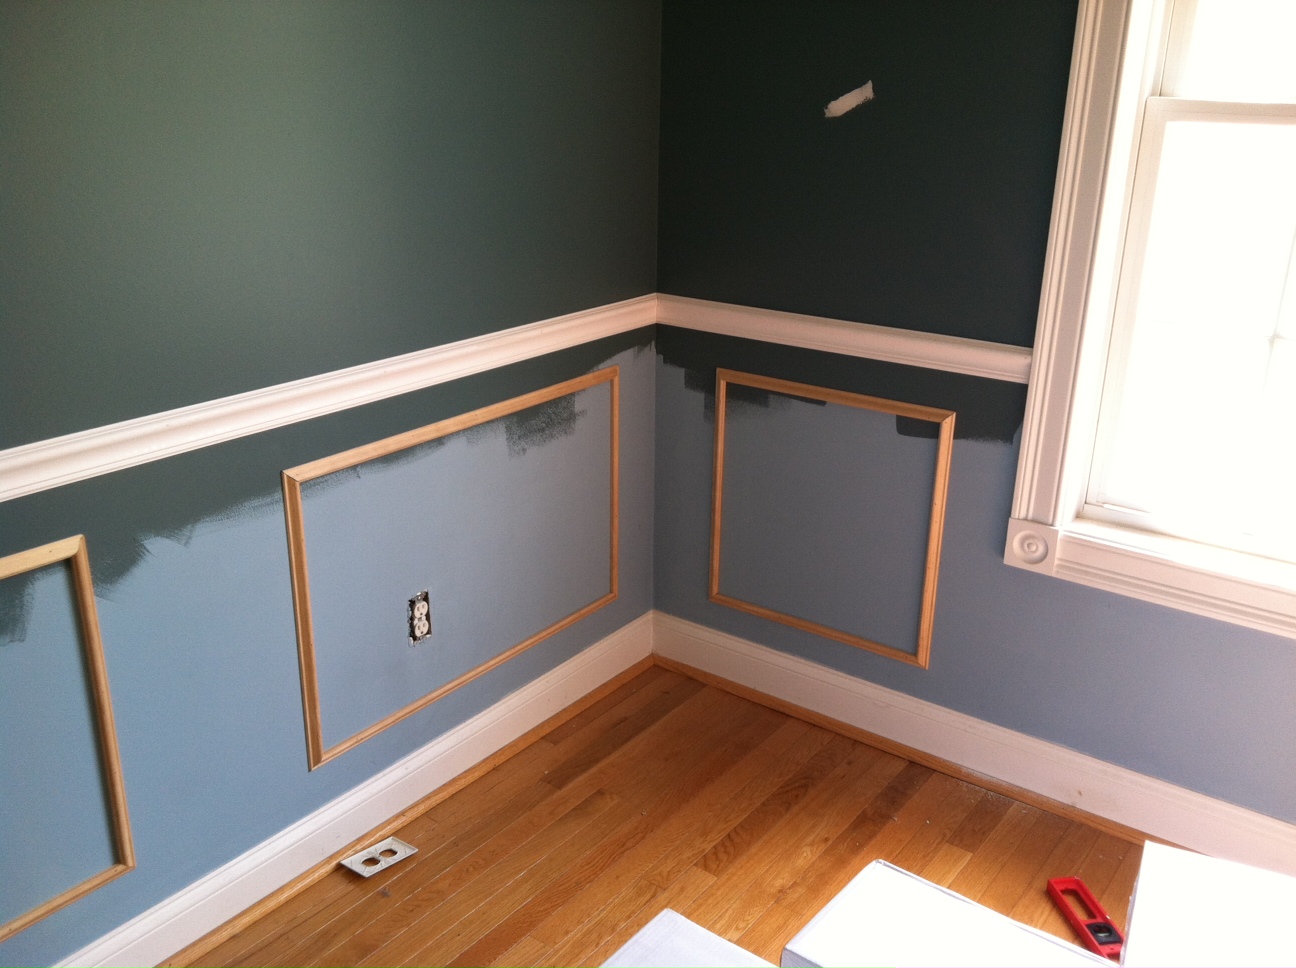 The Room Stylist DIY Project Wainscoting & Chair rail